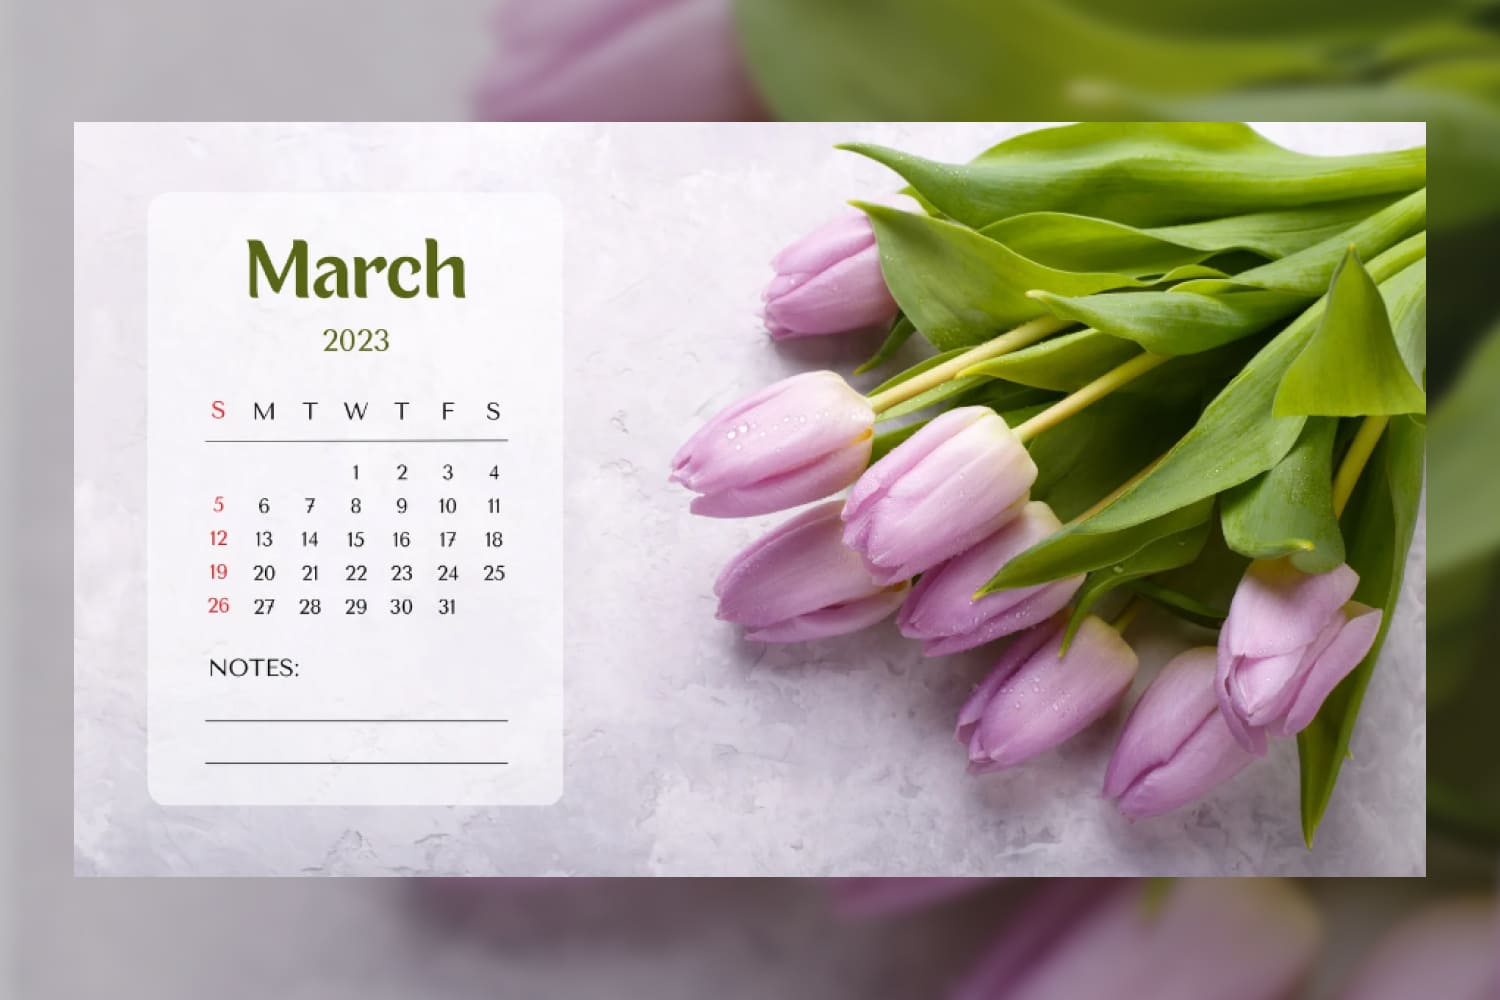 March 2023 calendar with tulips in soft pink and green tones.